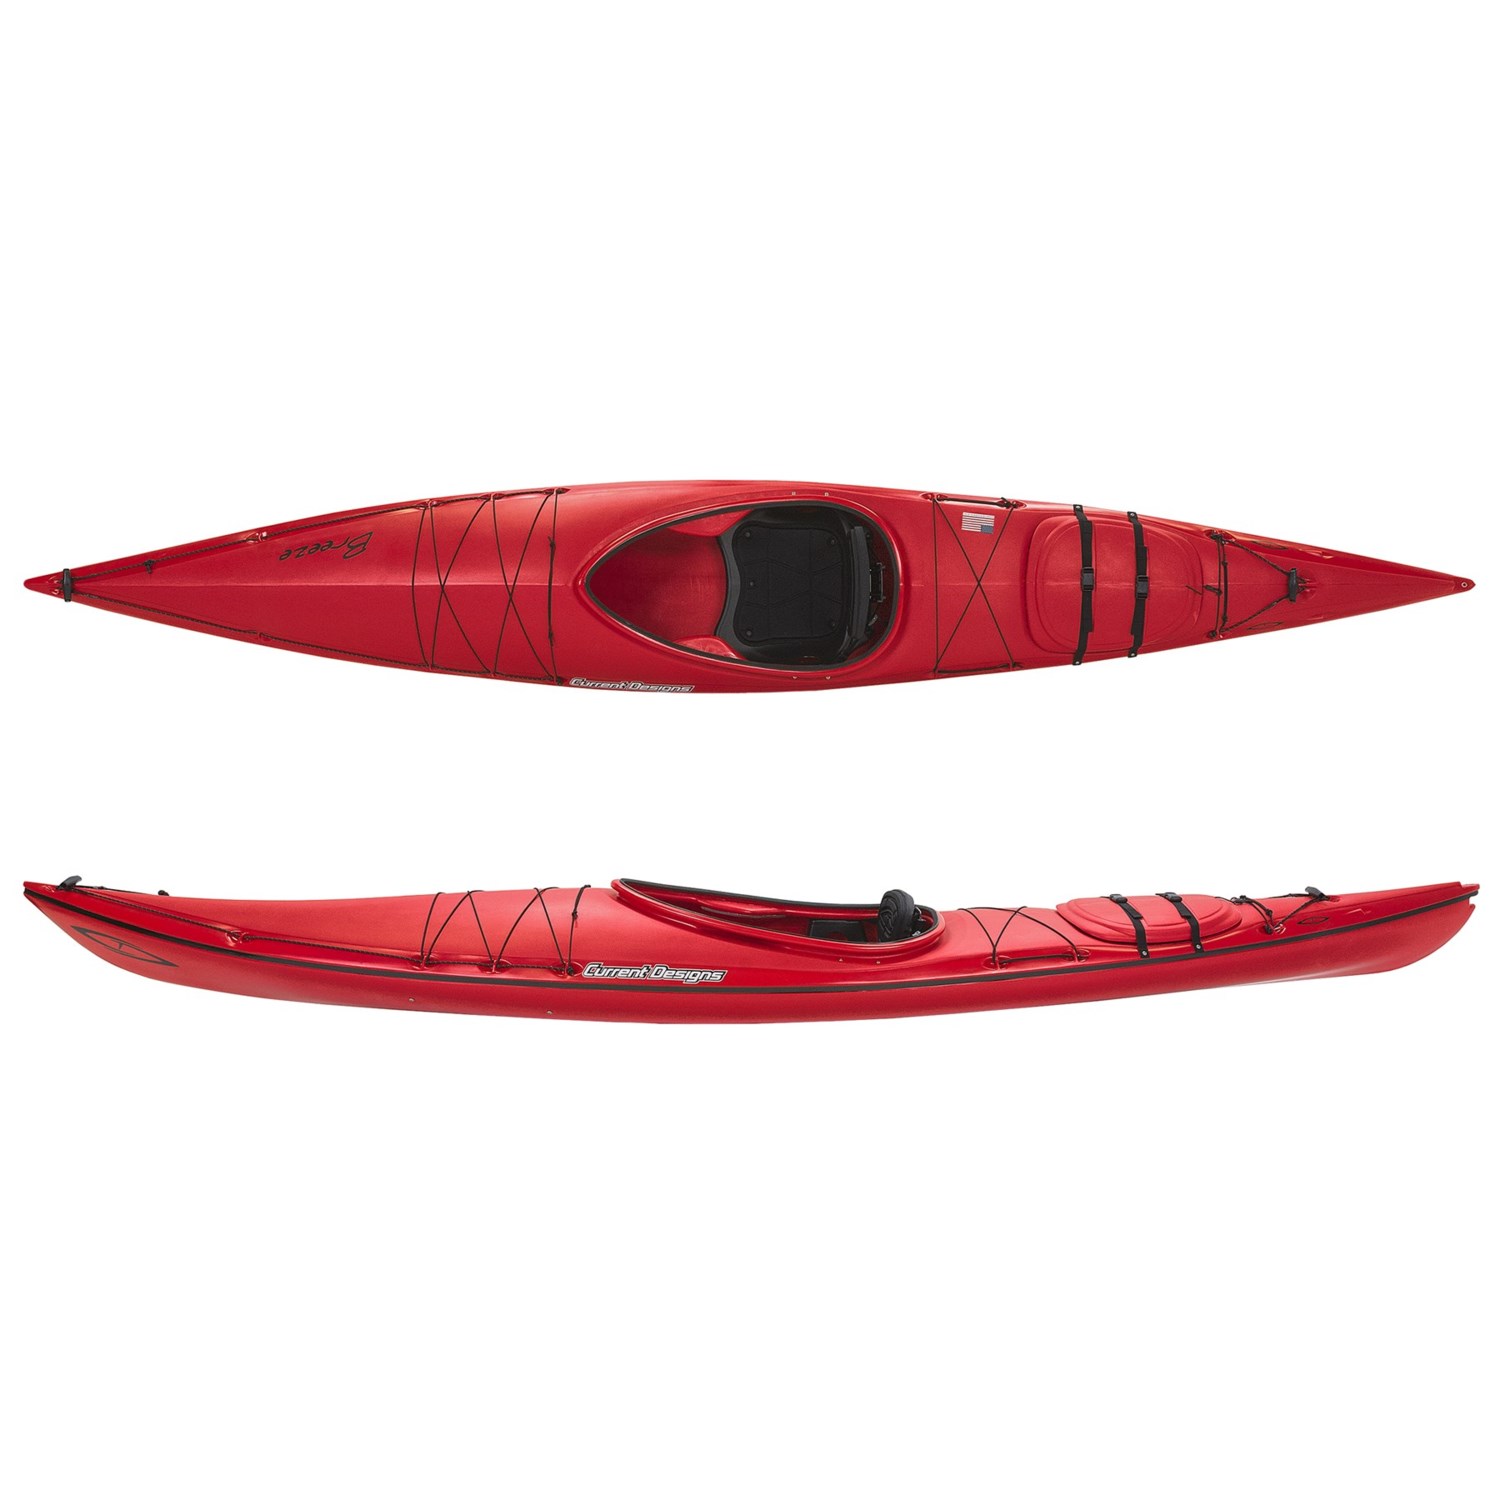 Current Designs Breeze Touring Kayak - 13’6” in Speckled Red